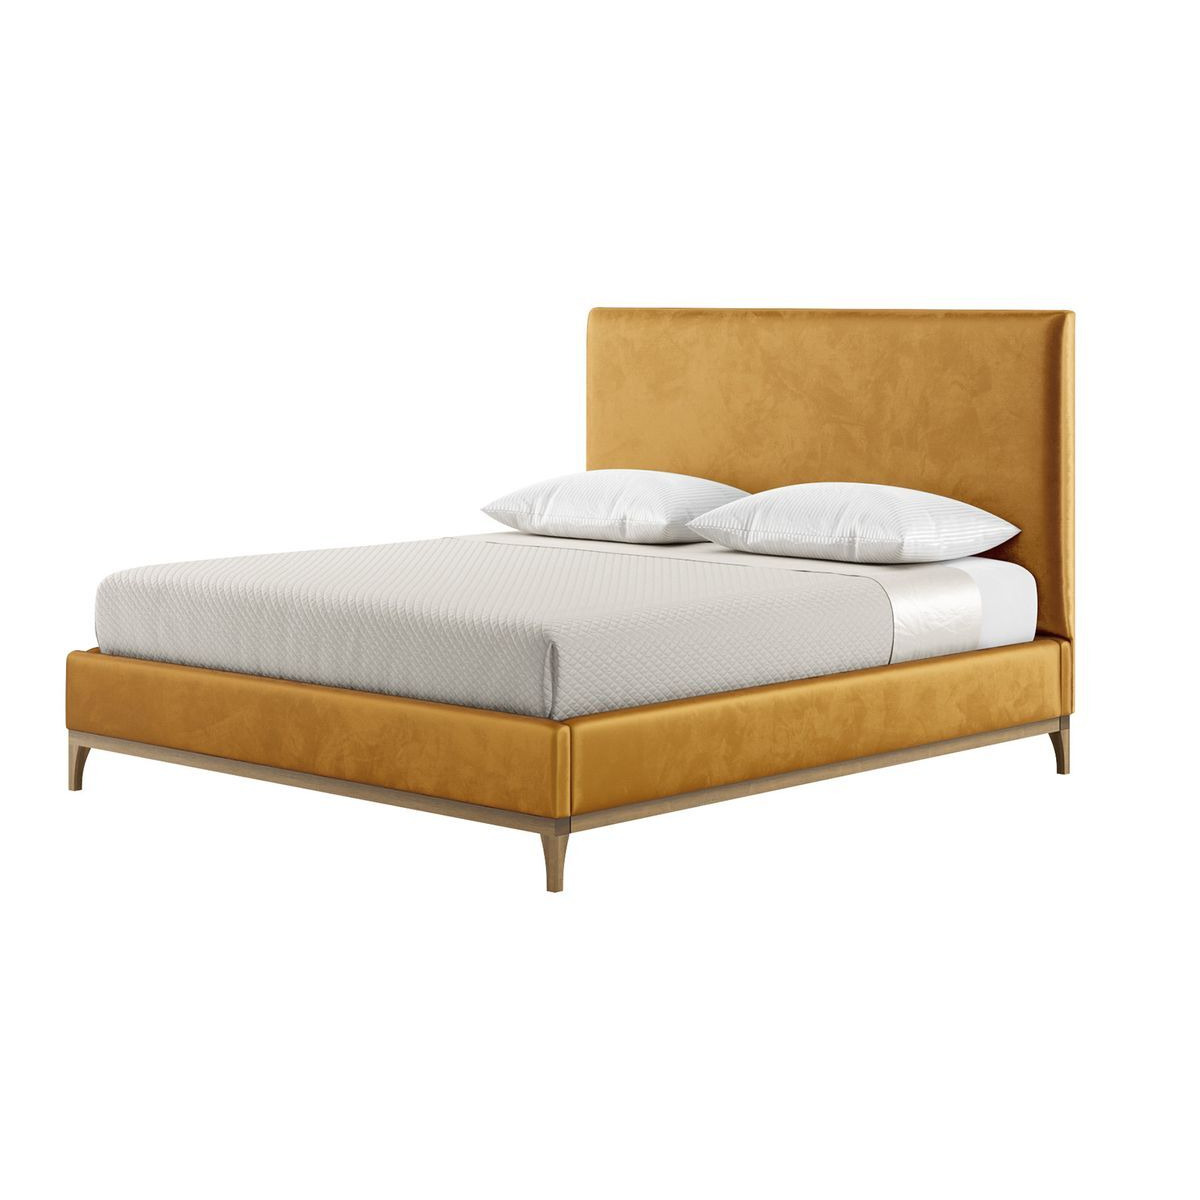 Diane 6ft Super King Size Bed Frame with modern smooth headboard, mustard, Leg colour: wax black - image 1